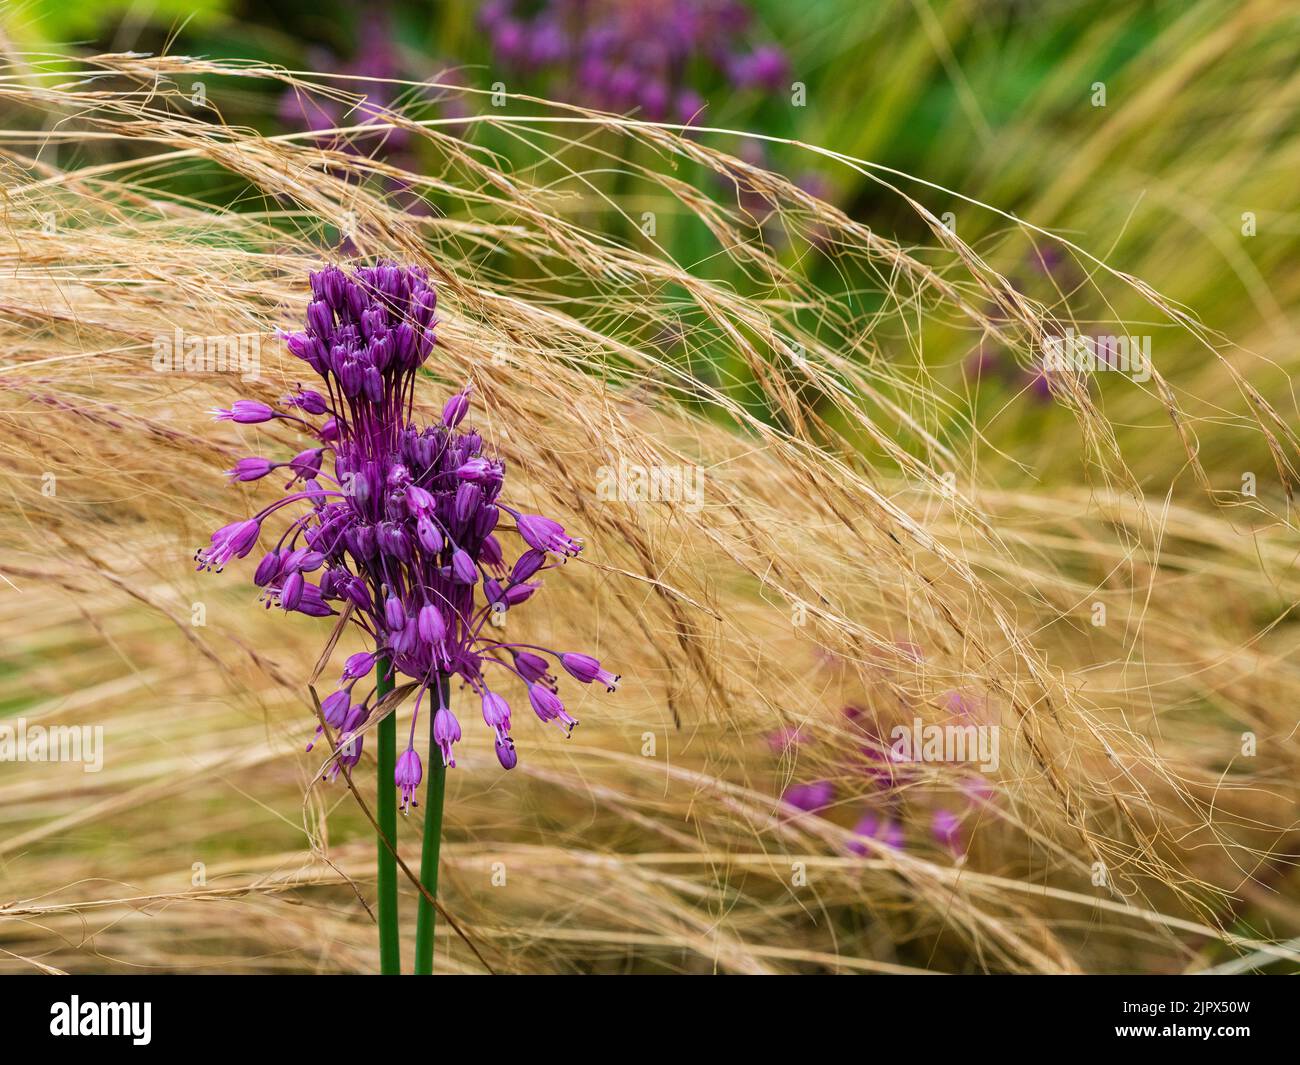 Lilac flower head of the keeled garlic, Allium carinatum ssp. pulchellum, contrast with the late summer feather grass, Stipa tenuissima Stock Photo